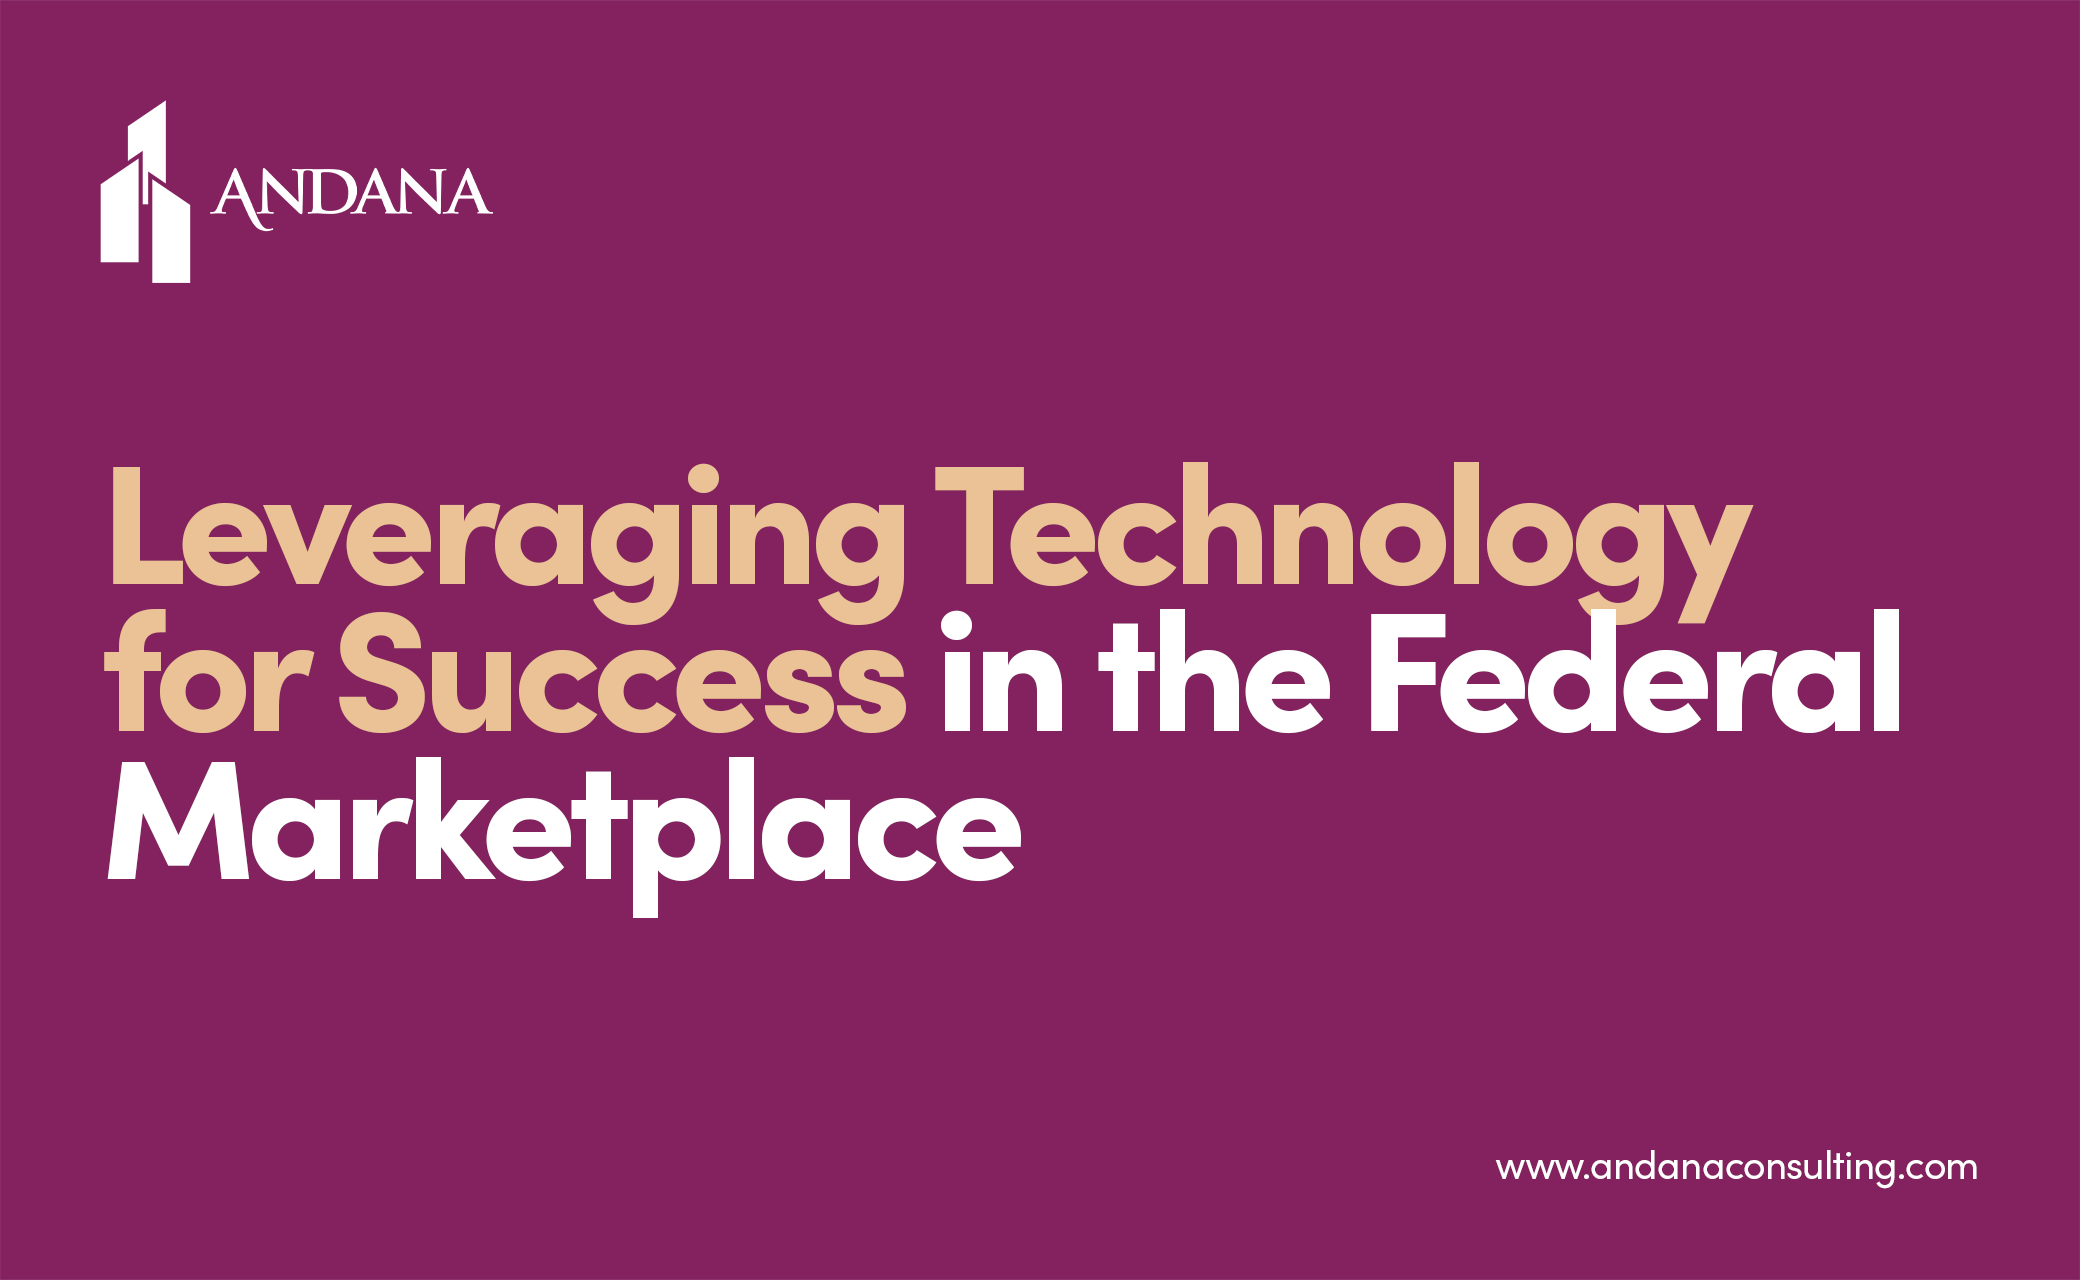 Leveraging Technology for Success in the Federal Marketplace